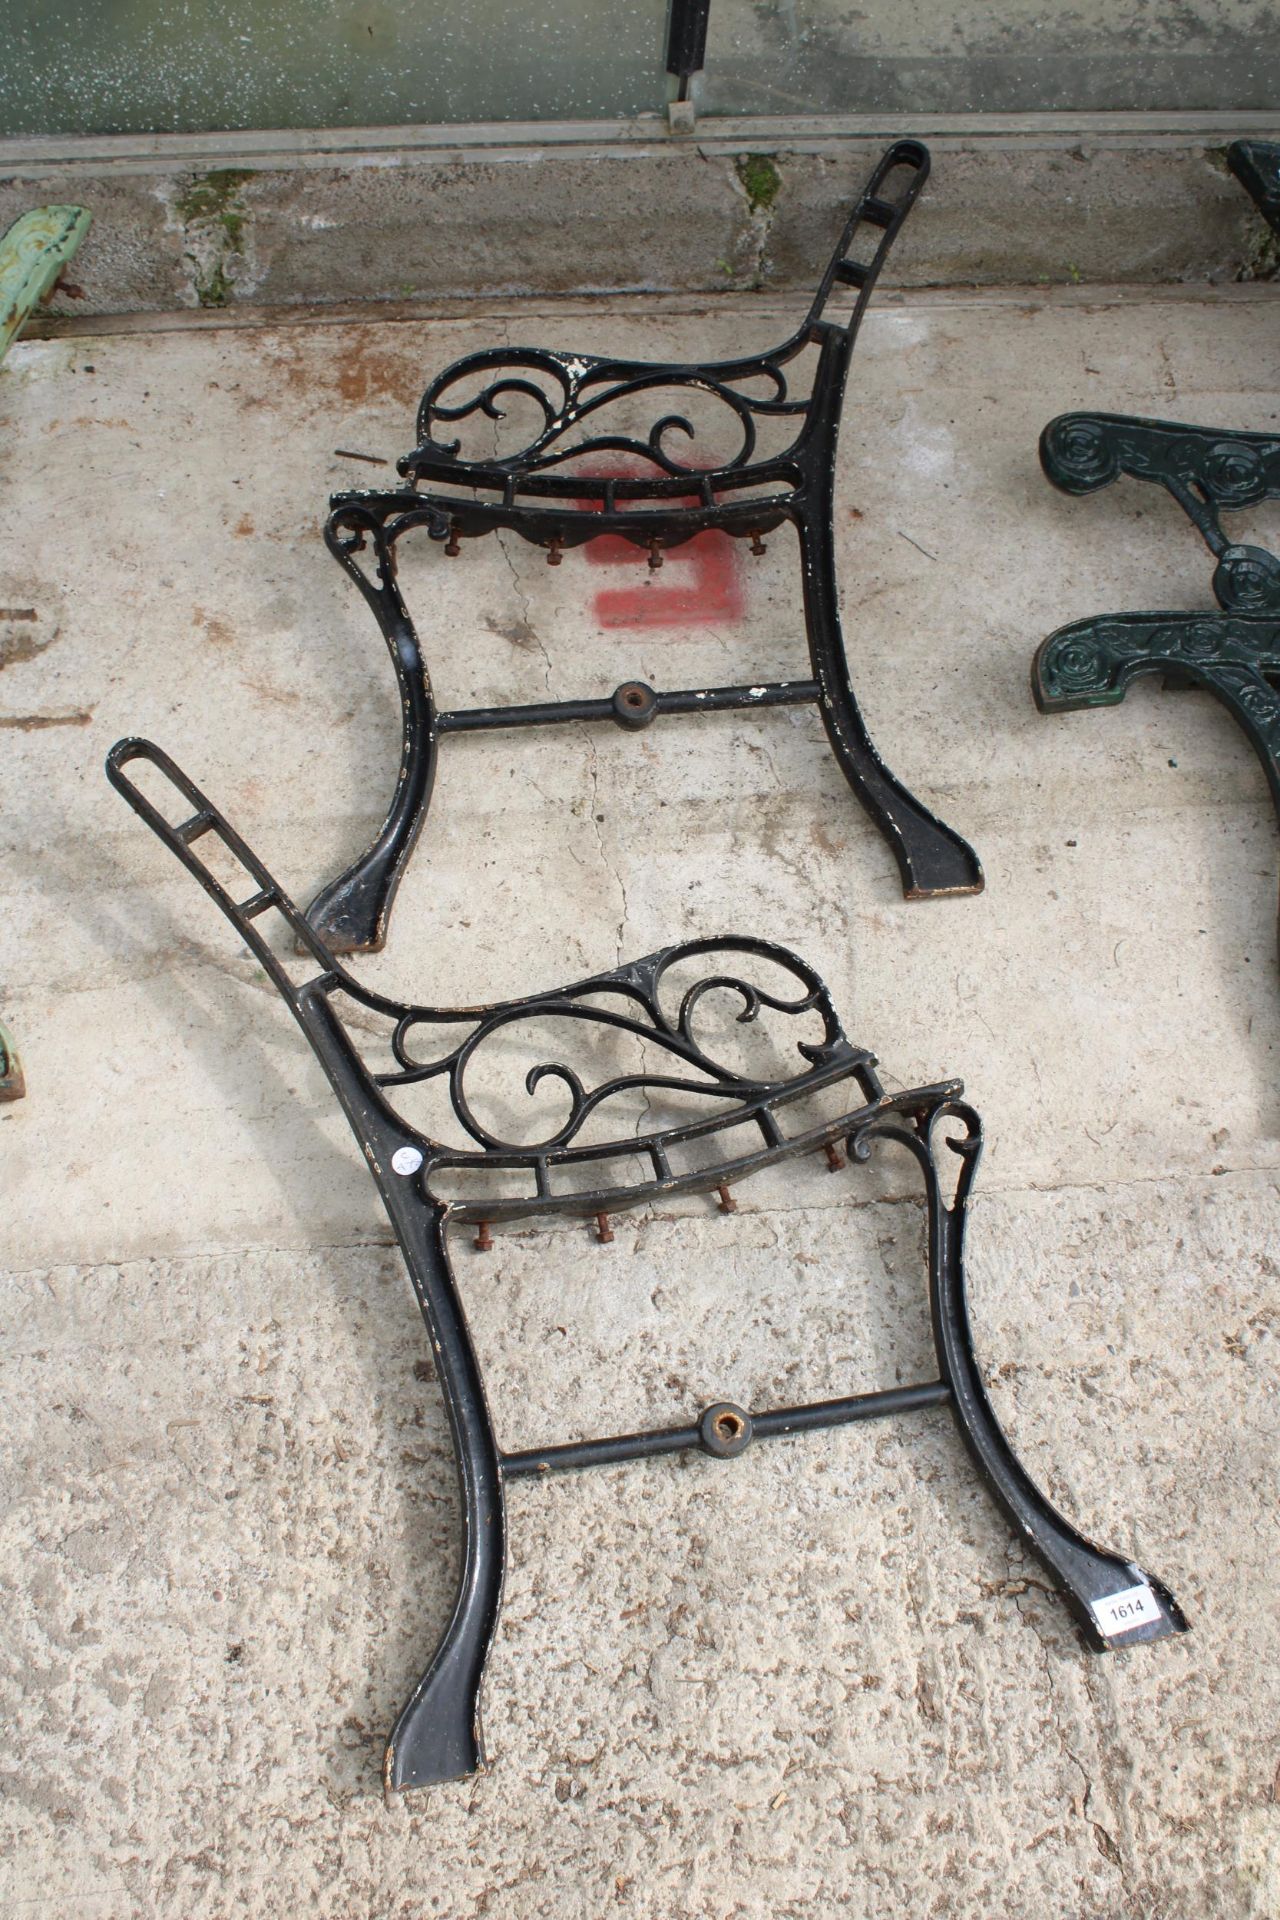 A PAIR OF DECORATIVE CAST BENCH ENDS